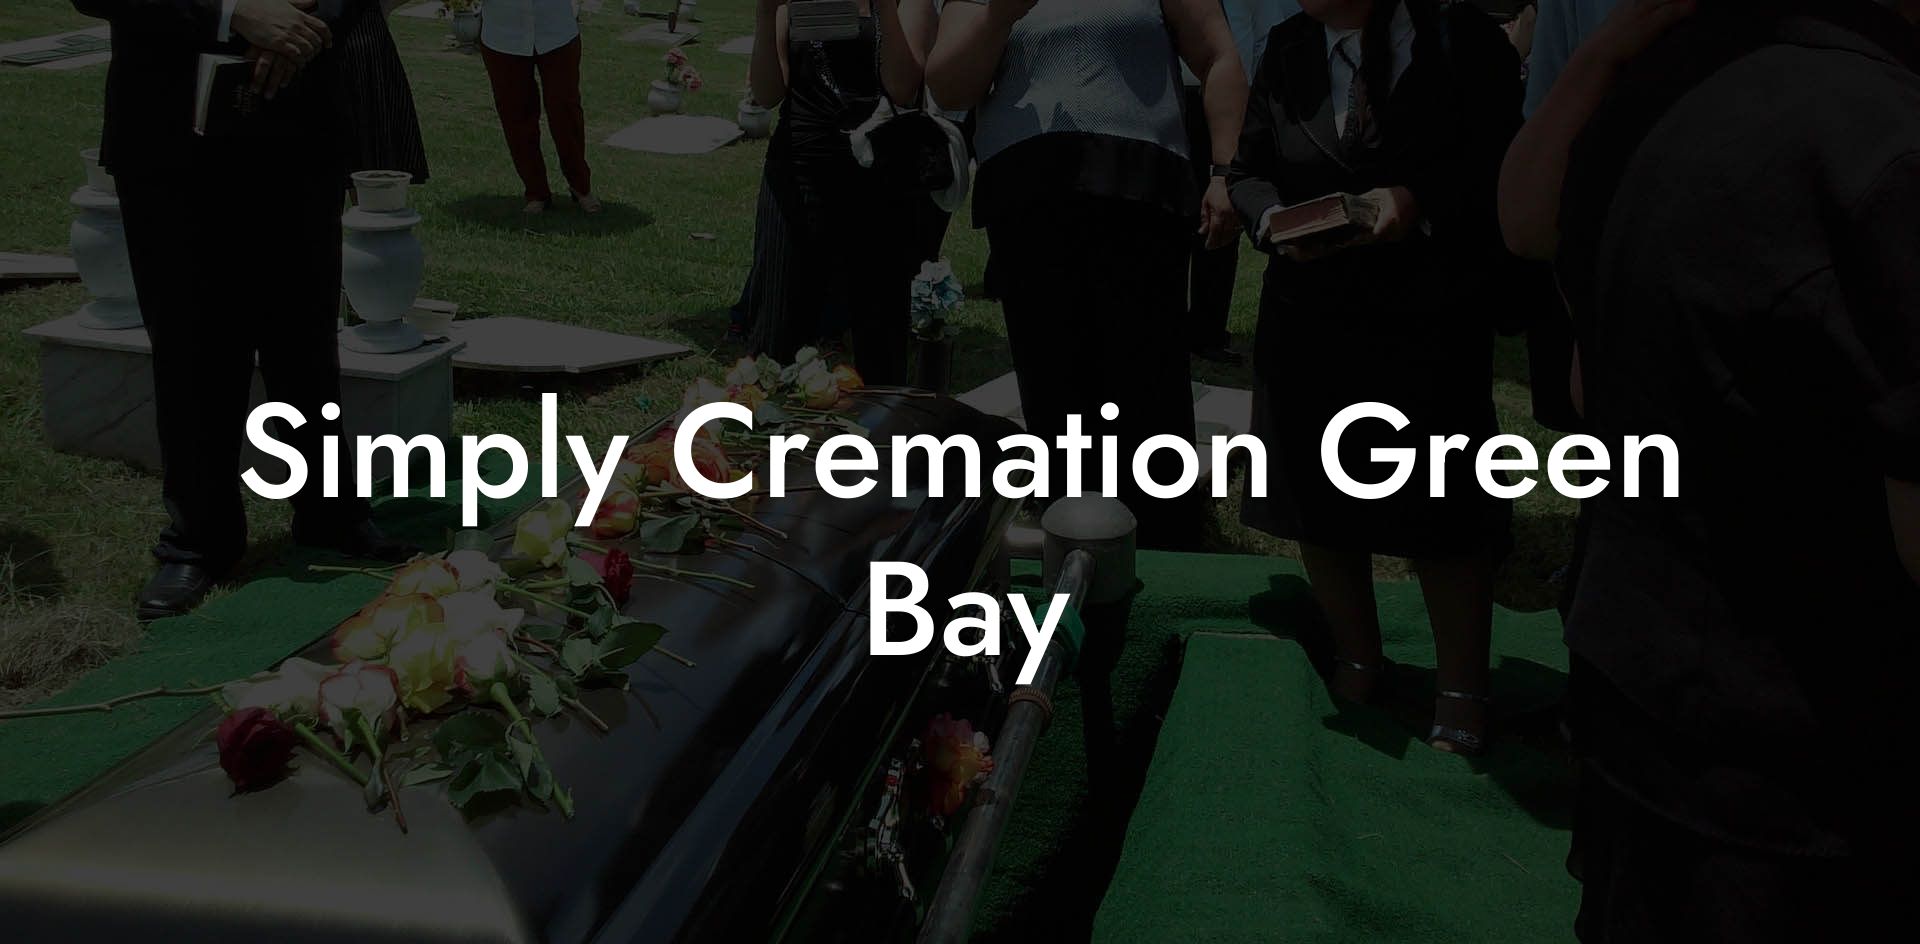 Simply Cremation Green Bay